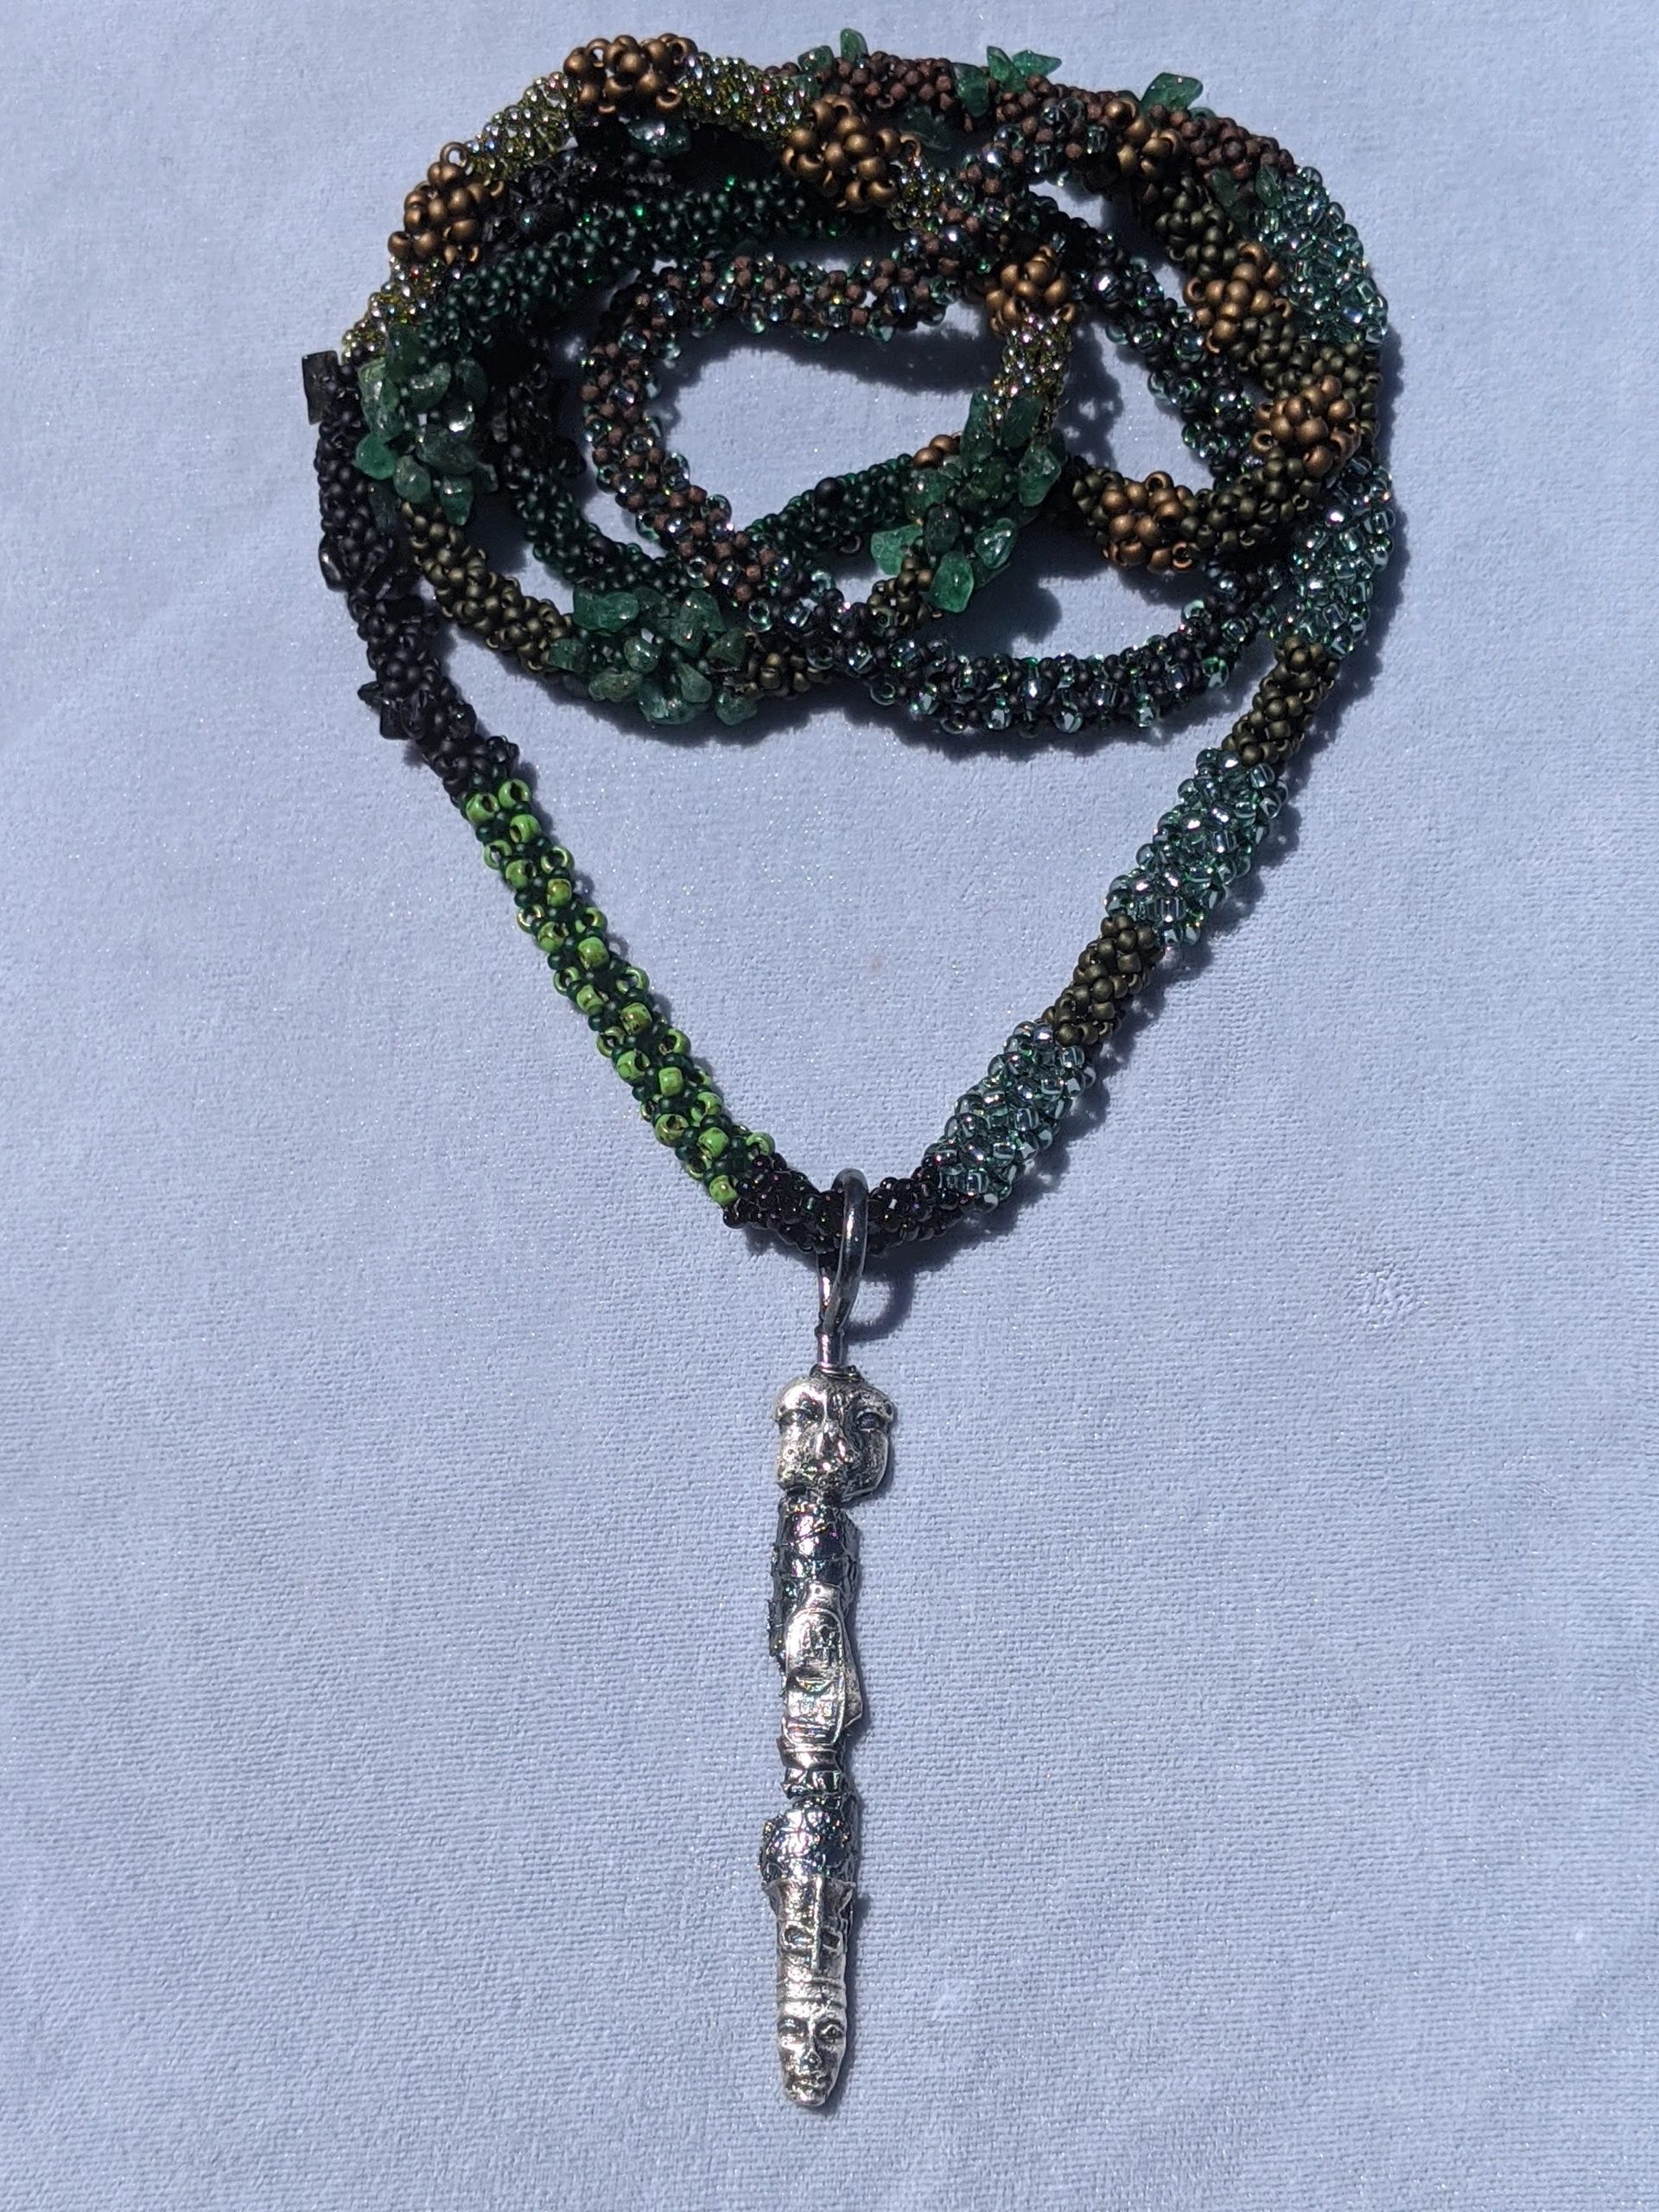 The Amulet - handcrafted pure silver pendant on a chain of gemstones and glass beads